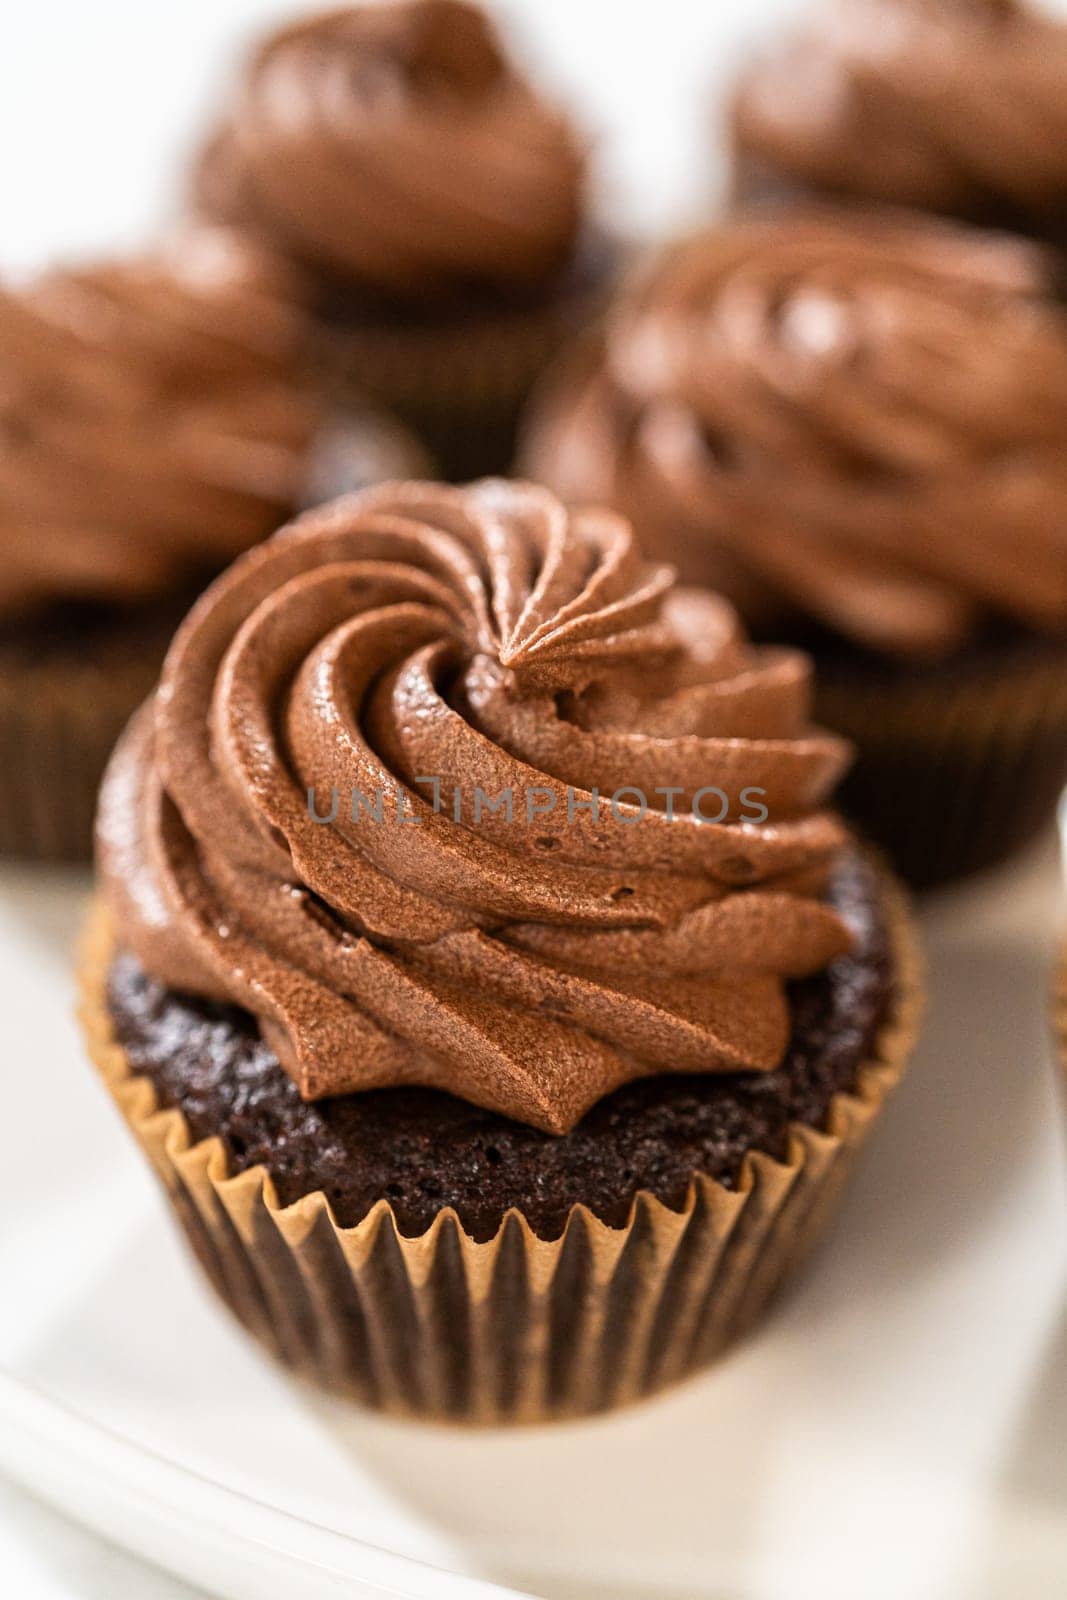 Freshly baked cupcakes have been masterfully infused with rich caramel and adorned with velvety chocolate frosting, all elegantly presented on a pristine white serving plate.